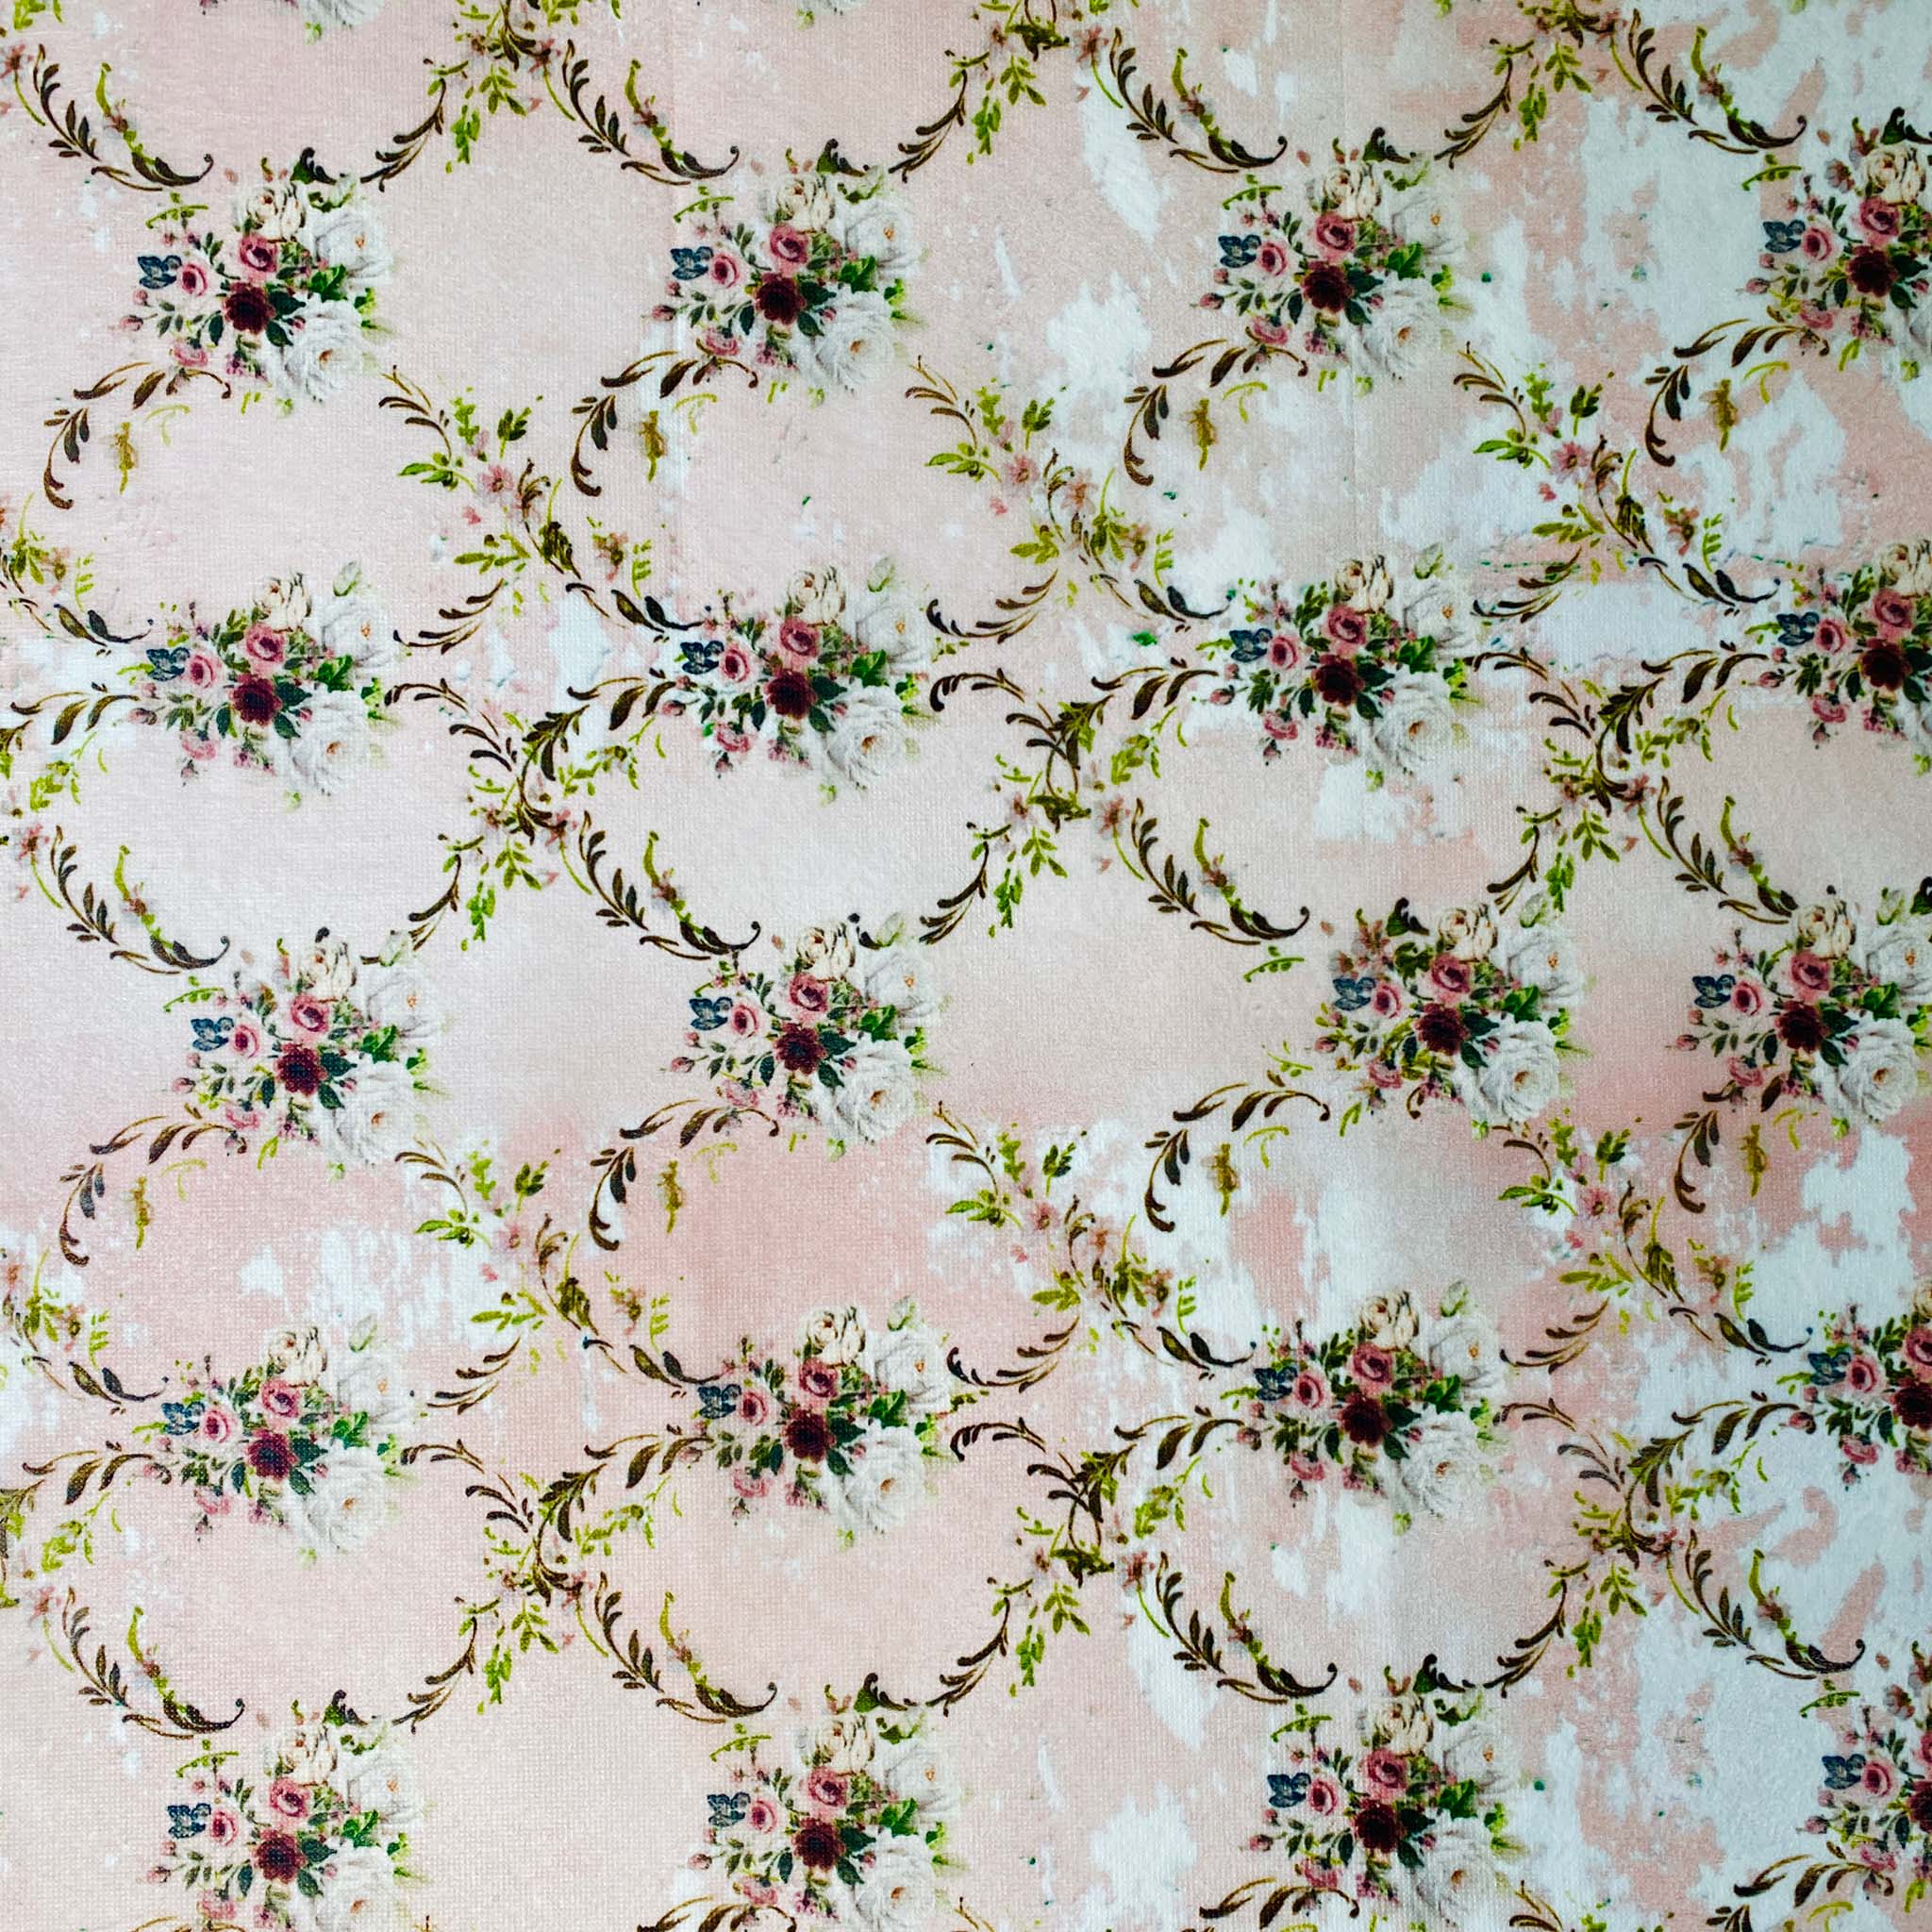 A close-up of a tissue paper design that features a repeating dainty floral diamond vining design against a pale pink and white background.